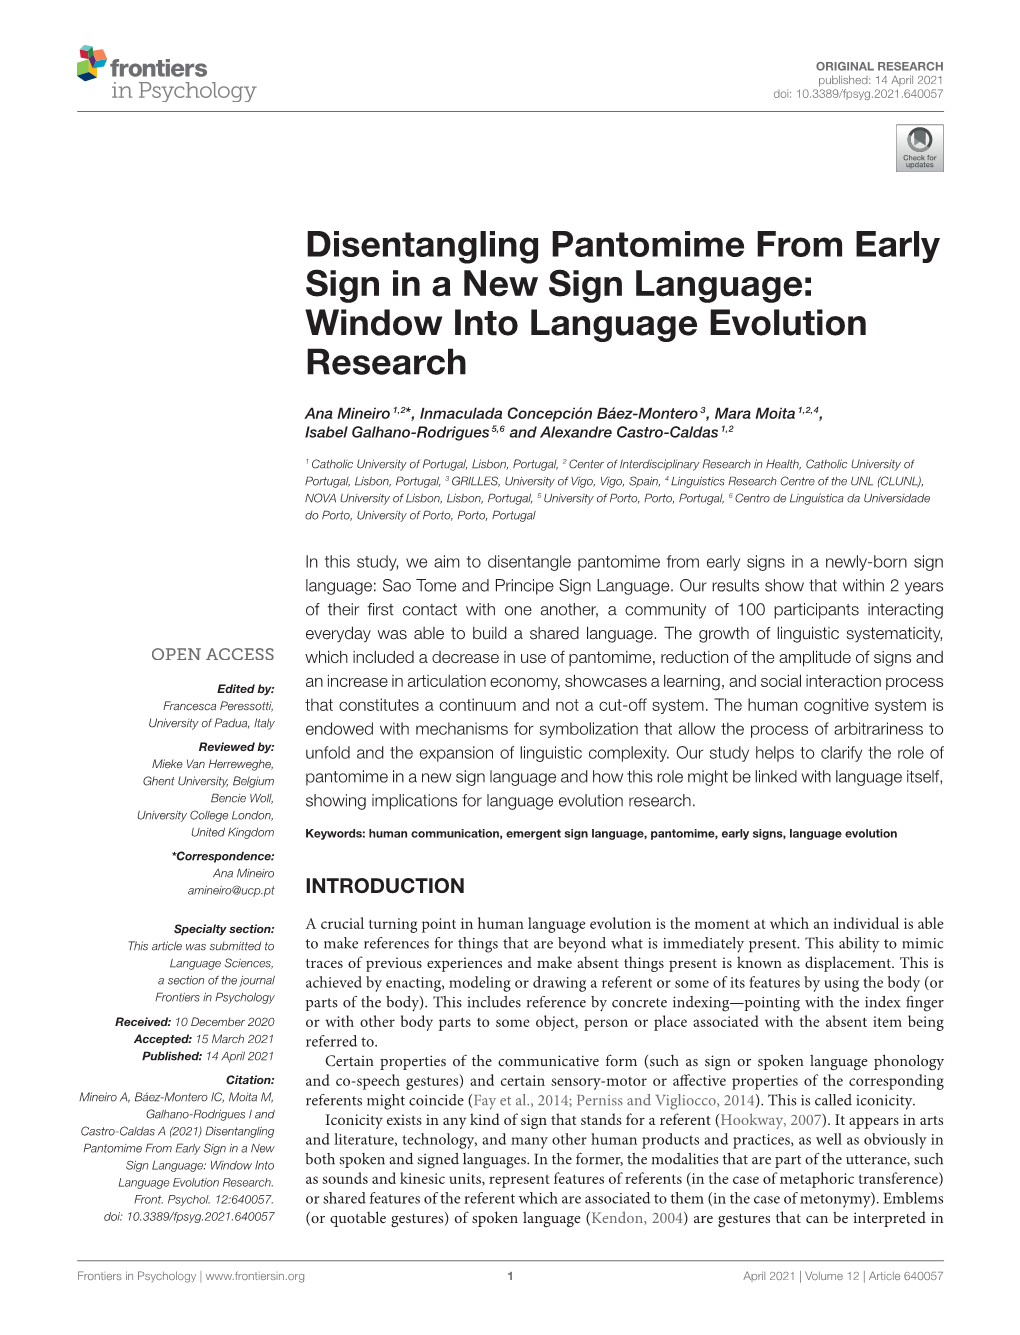 Disentangling Pantomime from Early Sign in a New Sign Language: Window Into Language Evolution Research